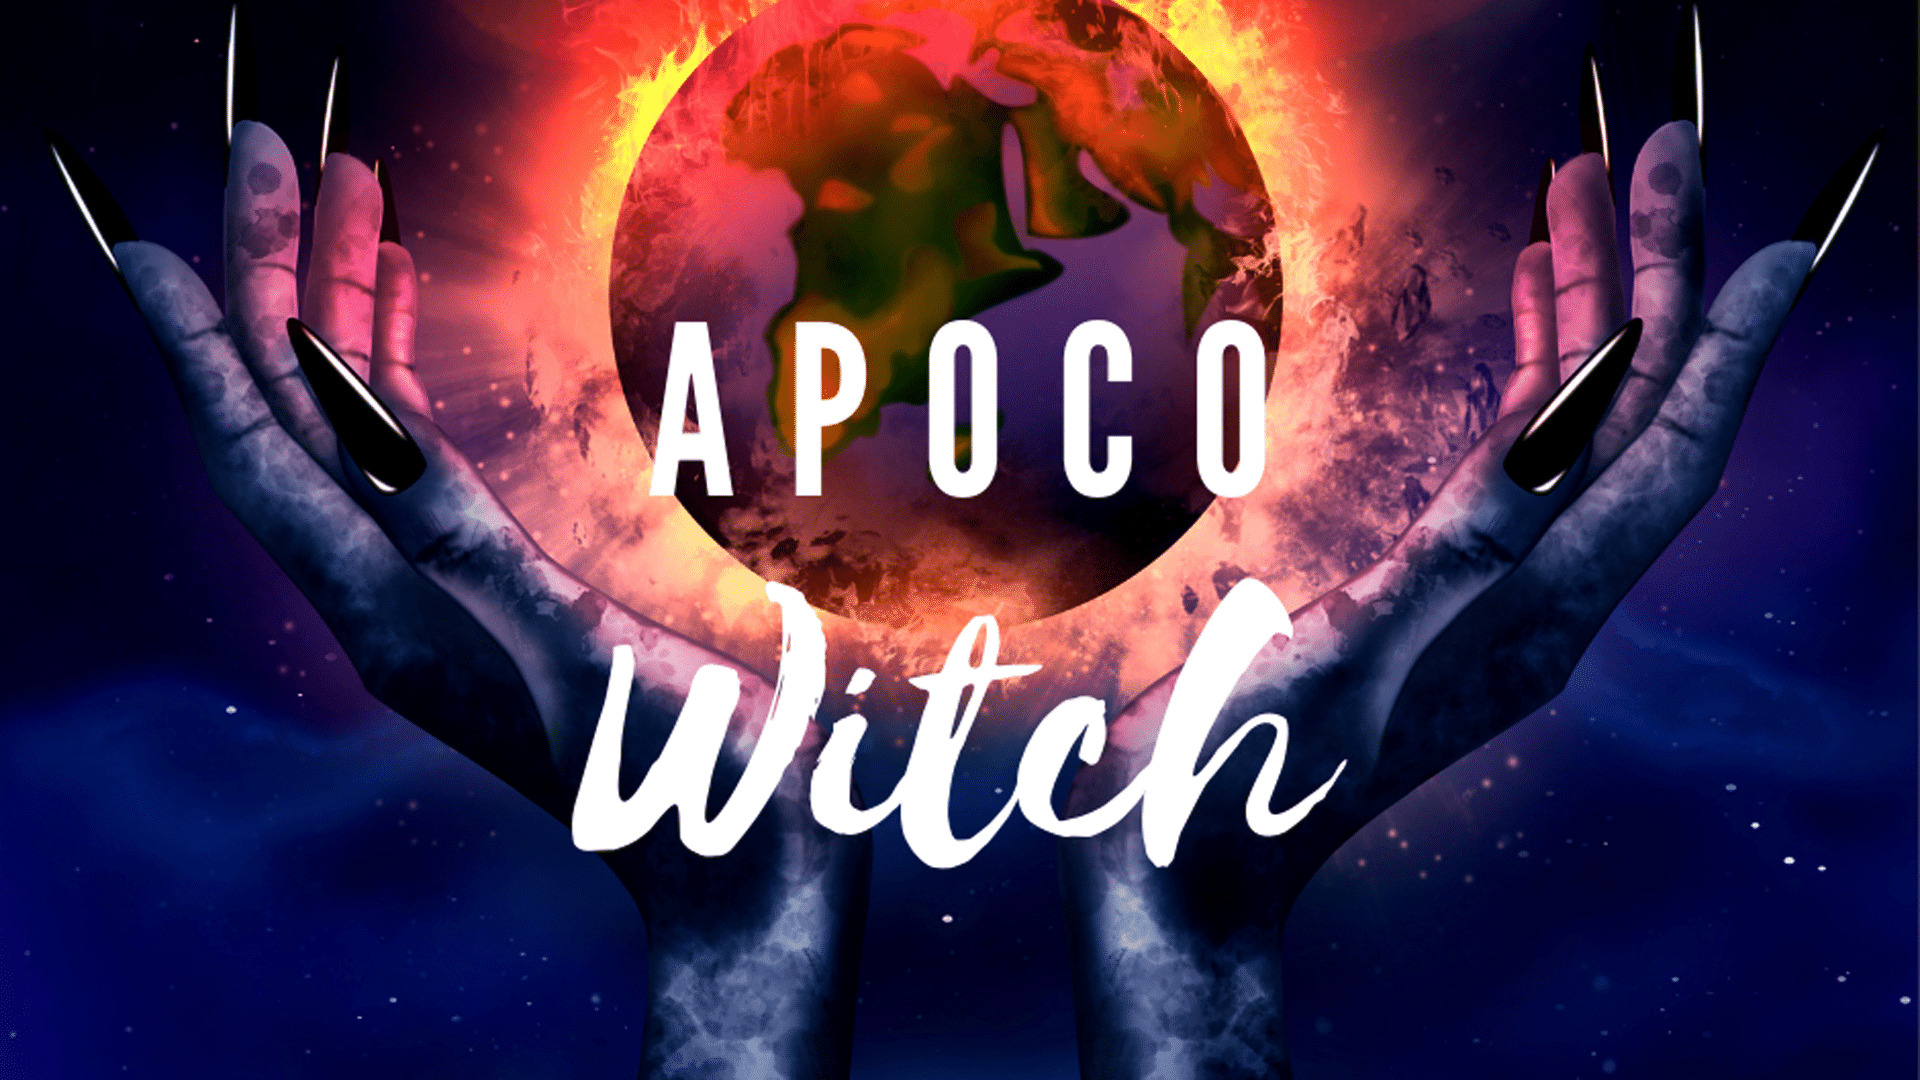 ApocoWitch (From 27th May)